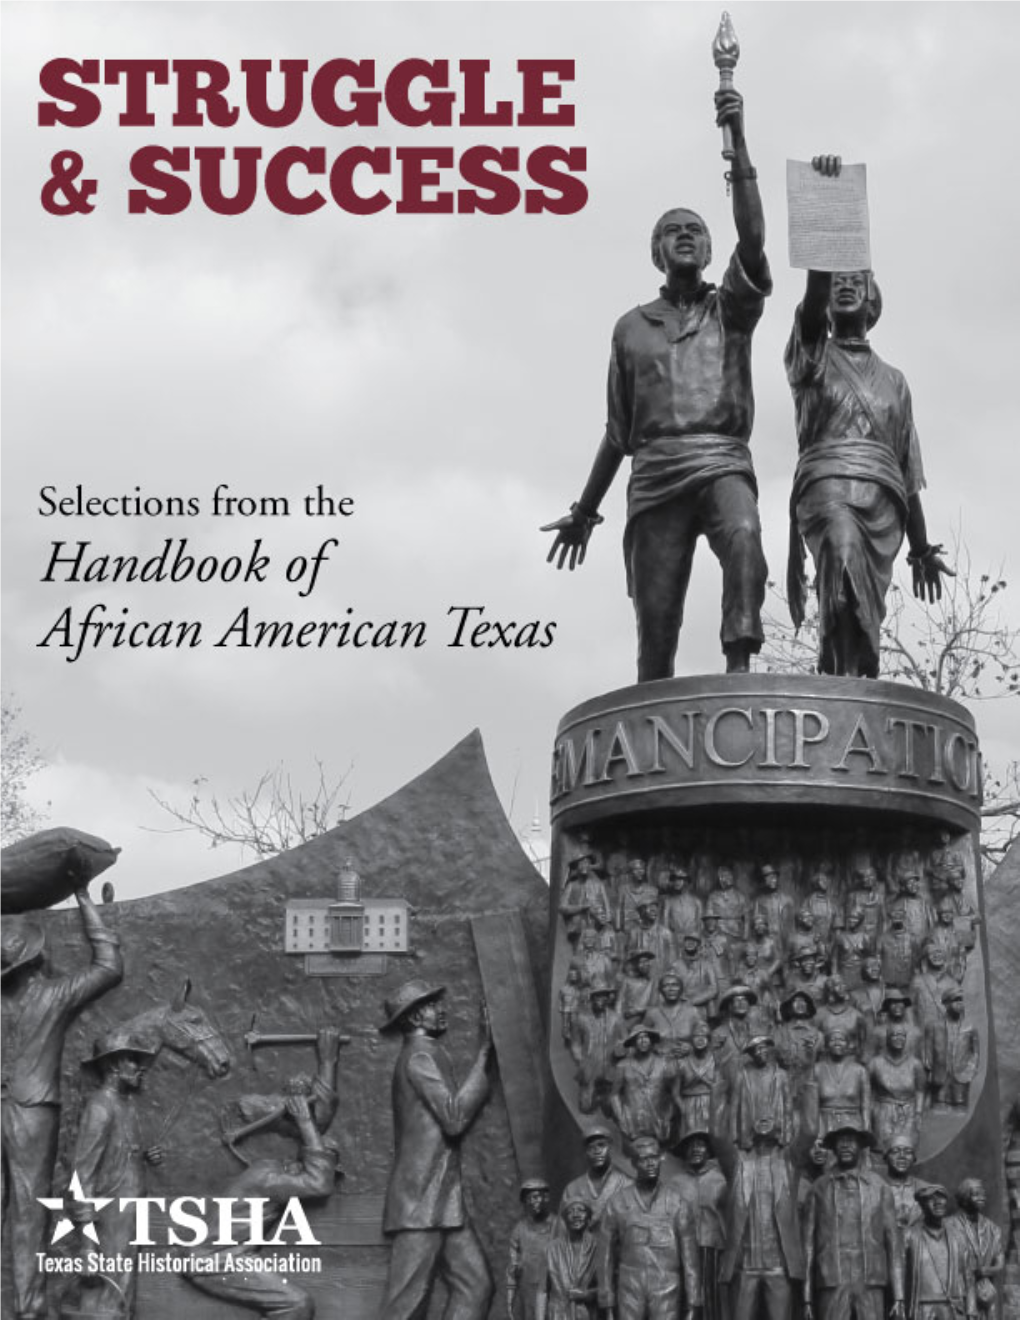 African Americans Have Been Part of the Landscape of Texas for As Long As Europeans and Their Descendants